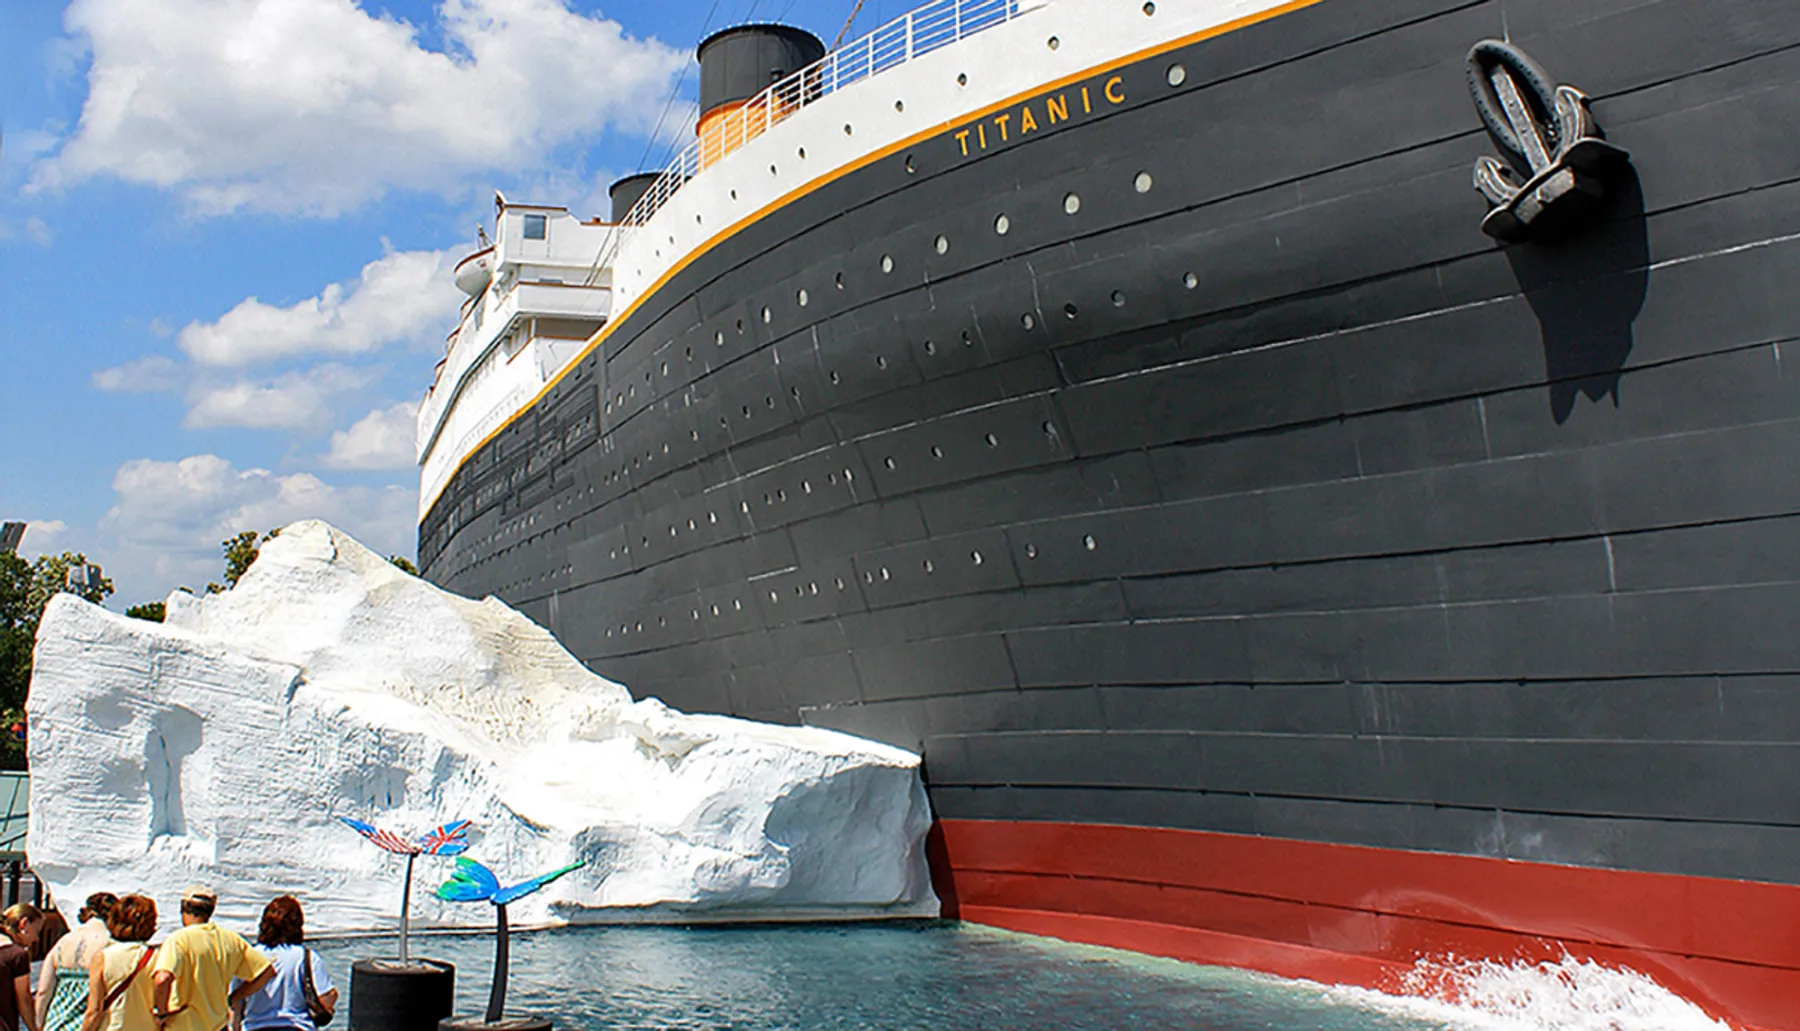 This image features a group of people looking at a large, stationary replica of the Titanic ship next to an artificial iceberg, likely part of a themed attraction or exhibit.